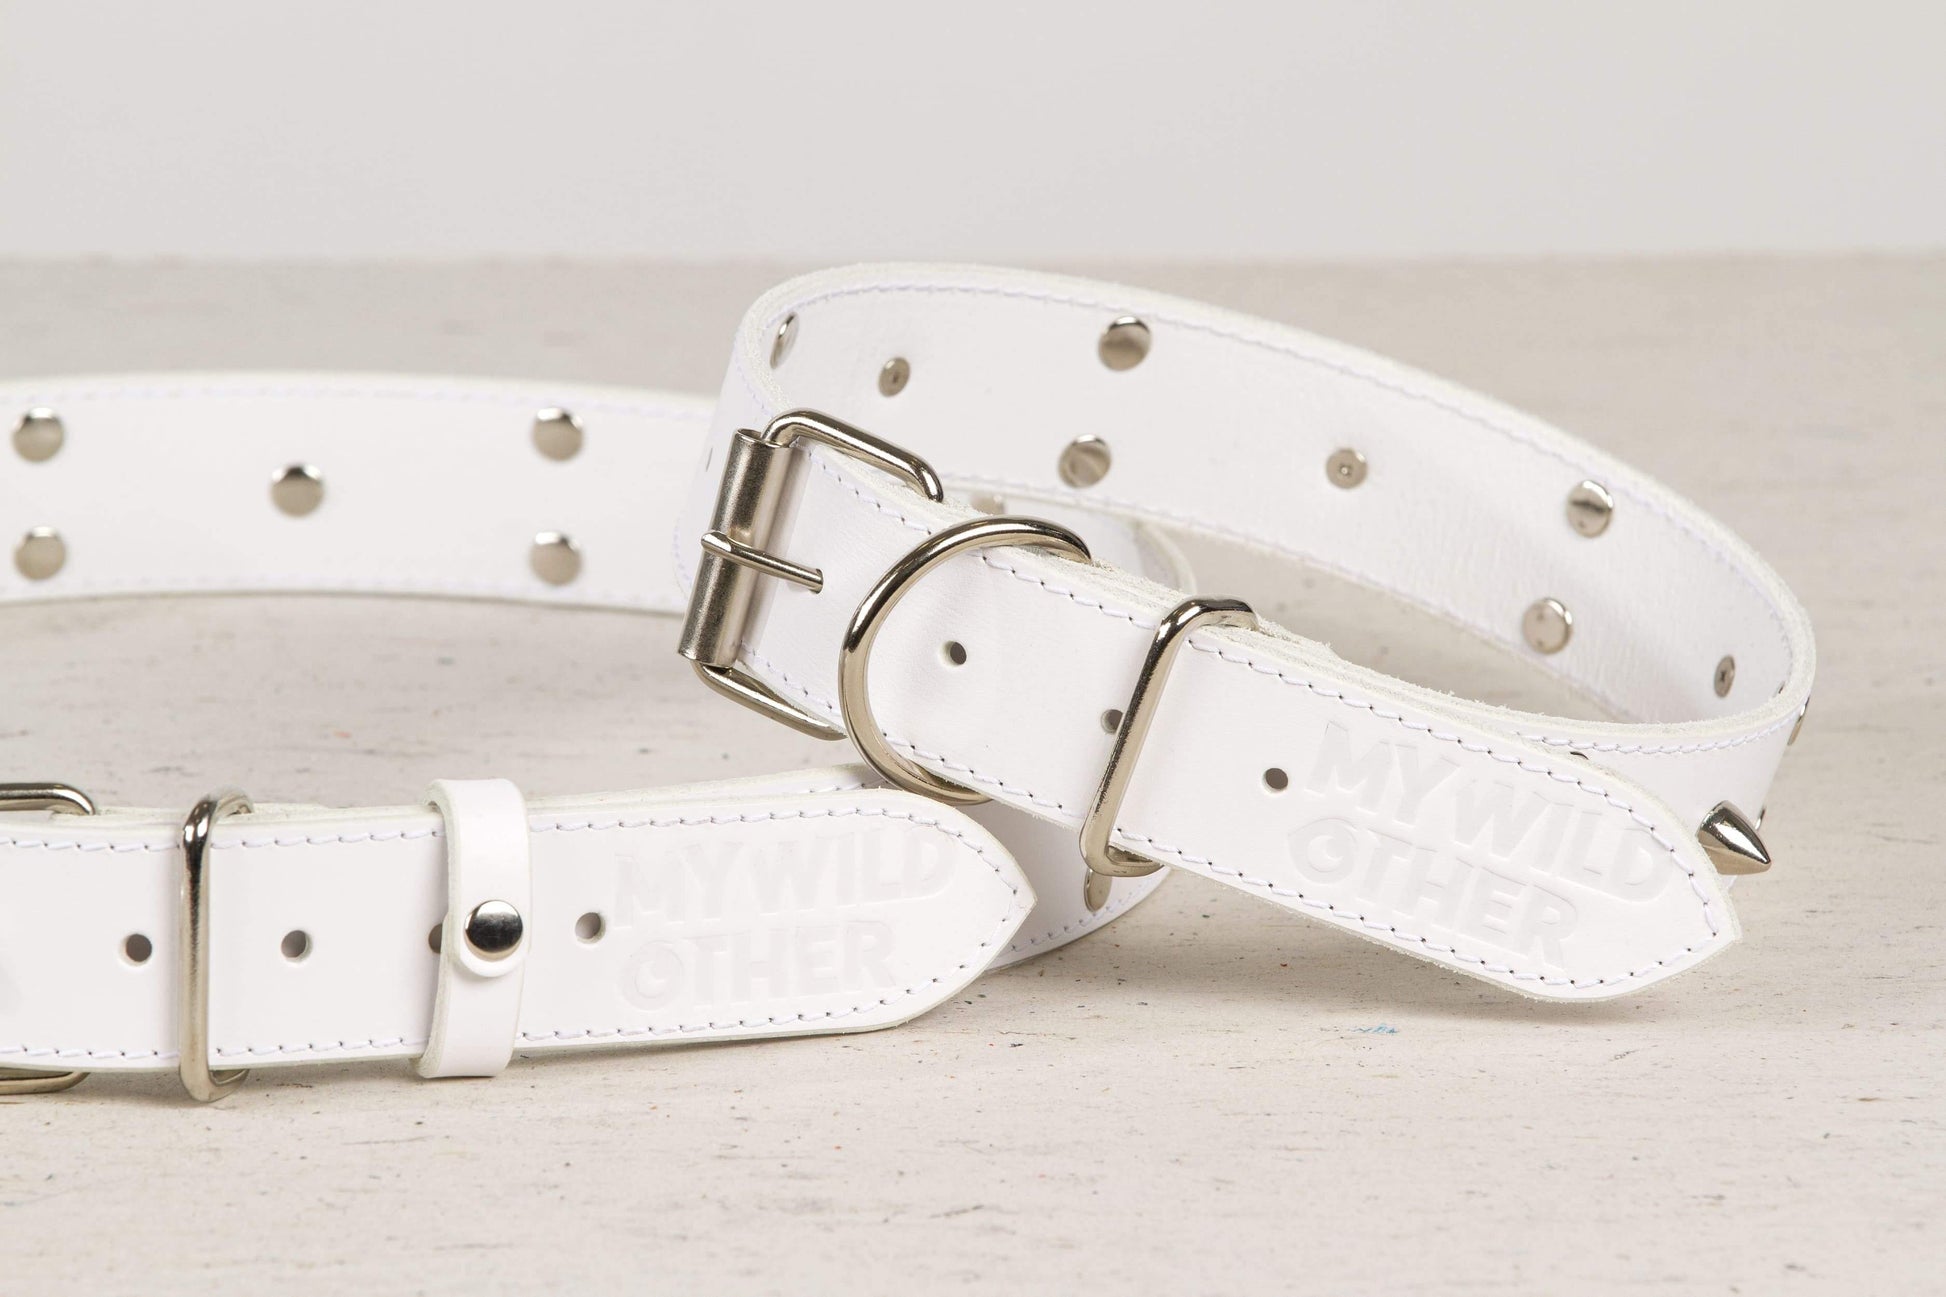 Handmade white leather STUDDED dog collar - premium dog goods handmade in Europe by My Wild Other